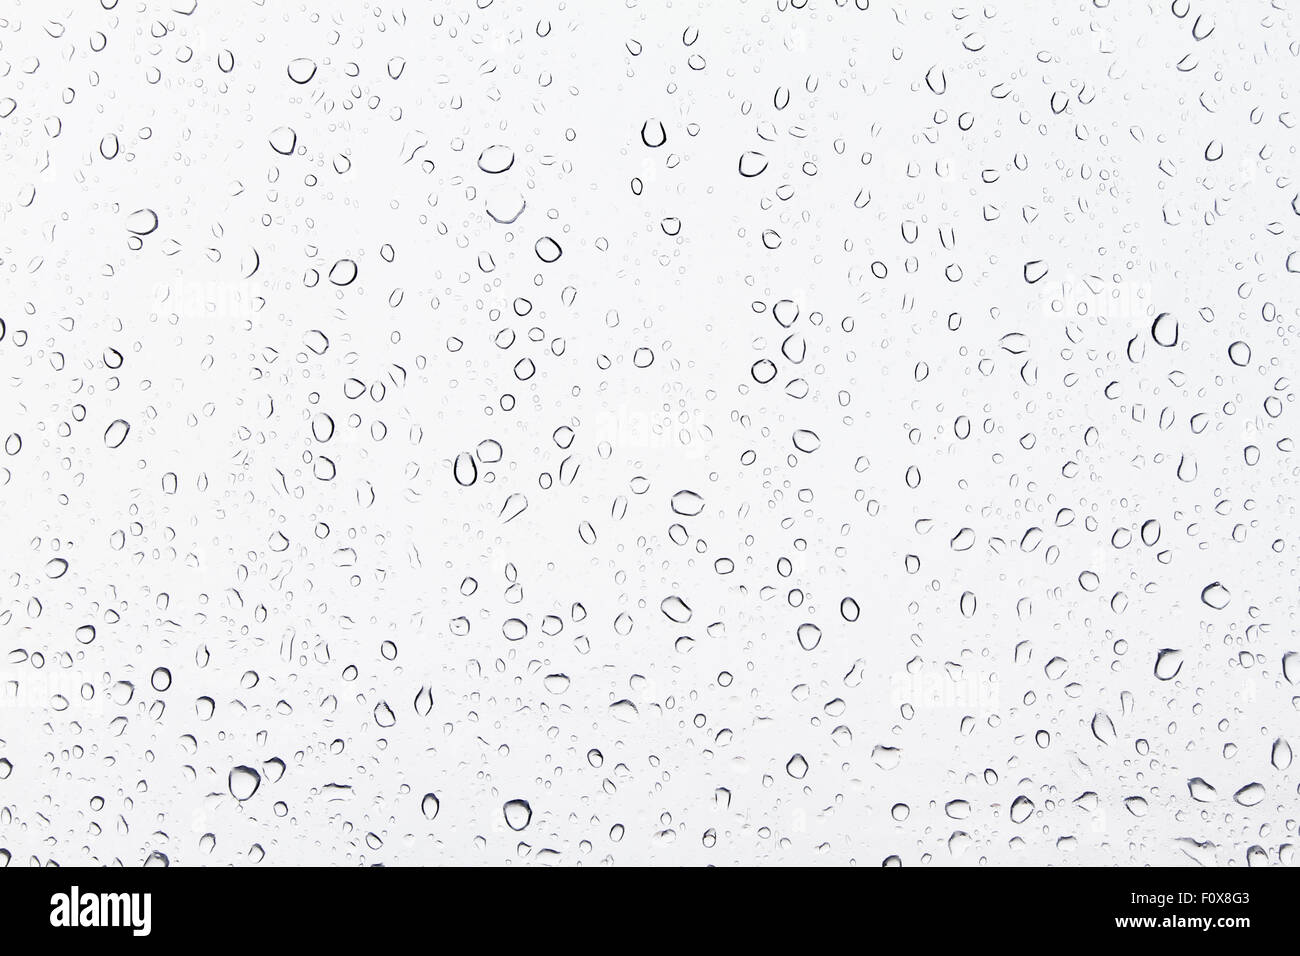 Rain drops on glass as a background and texture Stock Photo